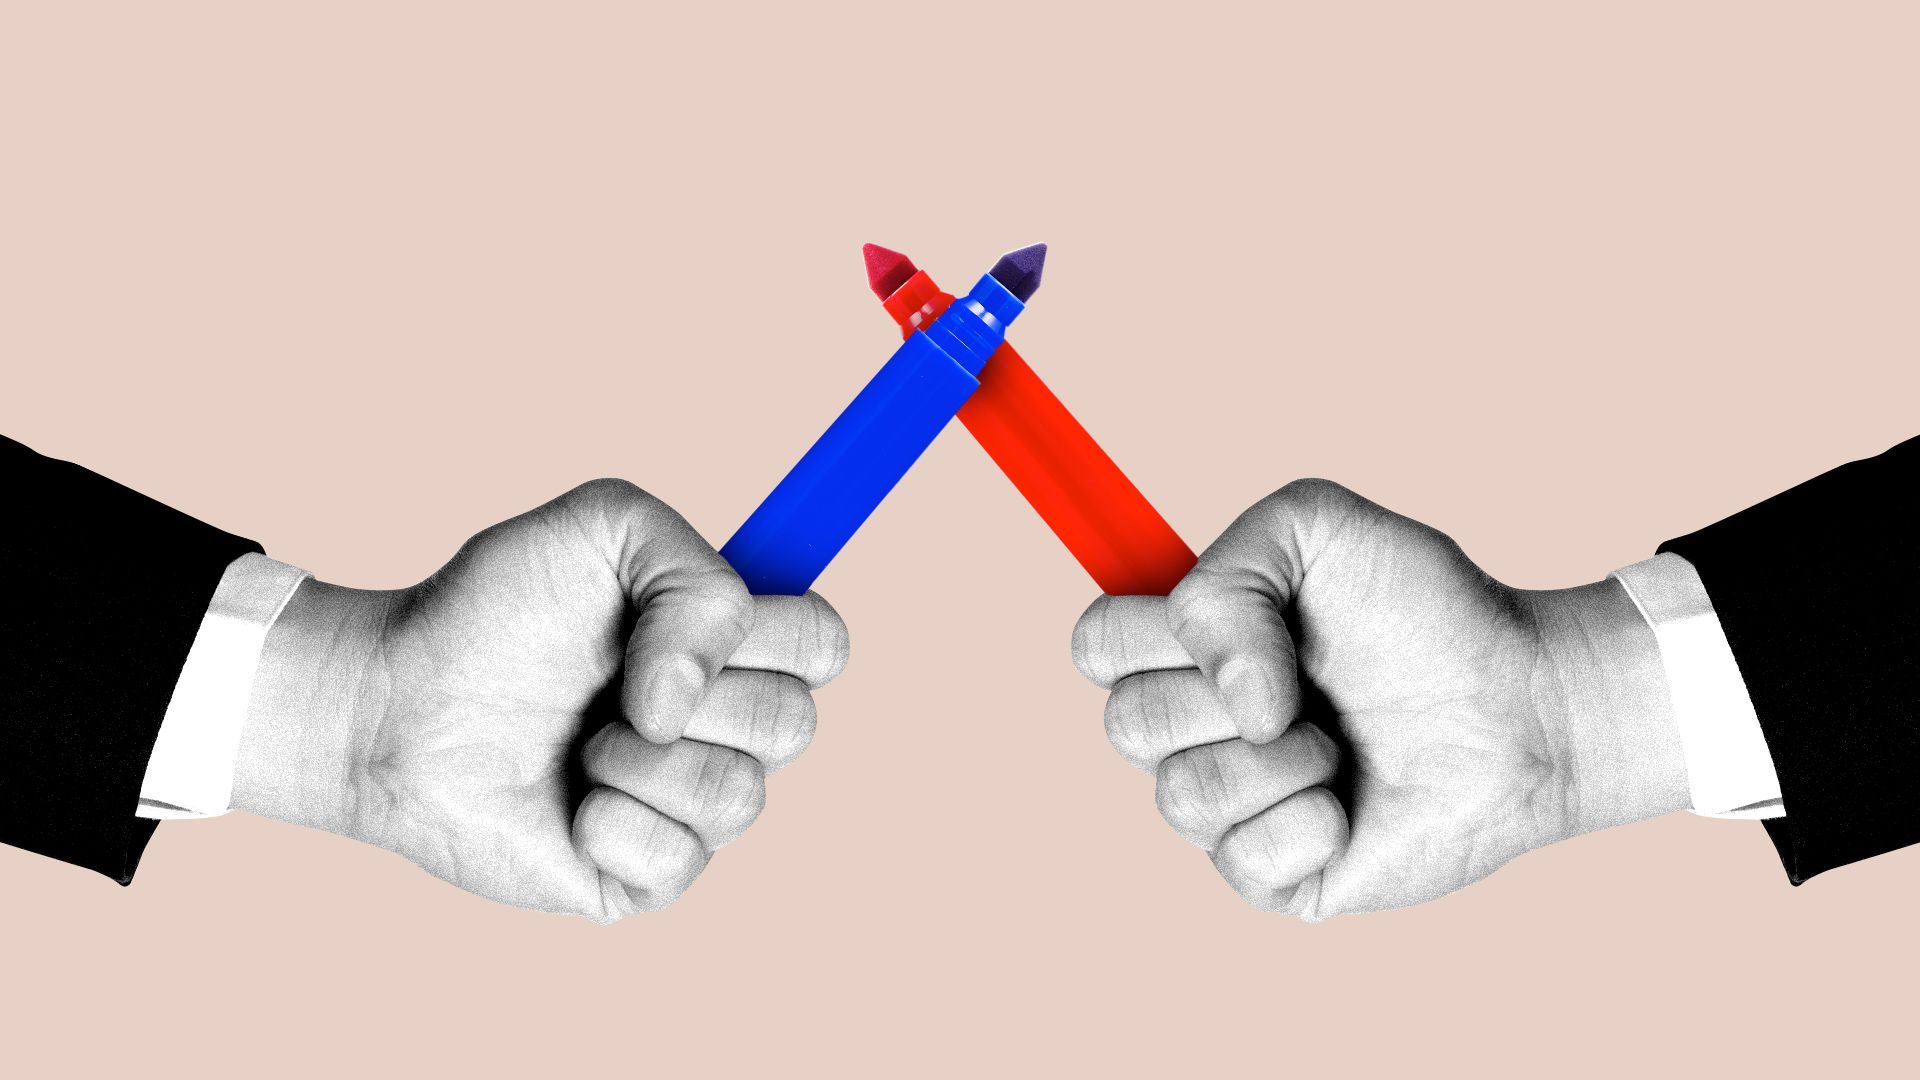 Illustration of two hands holding markers like crossed swords, one marker is red one marker is blue. 